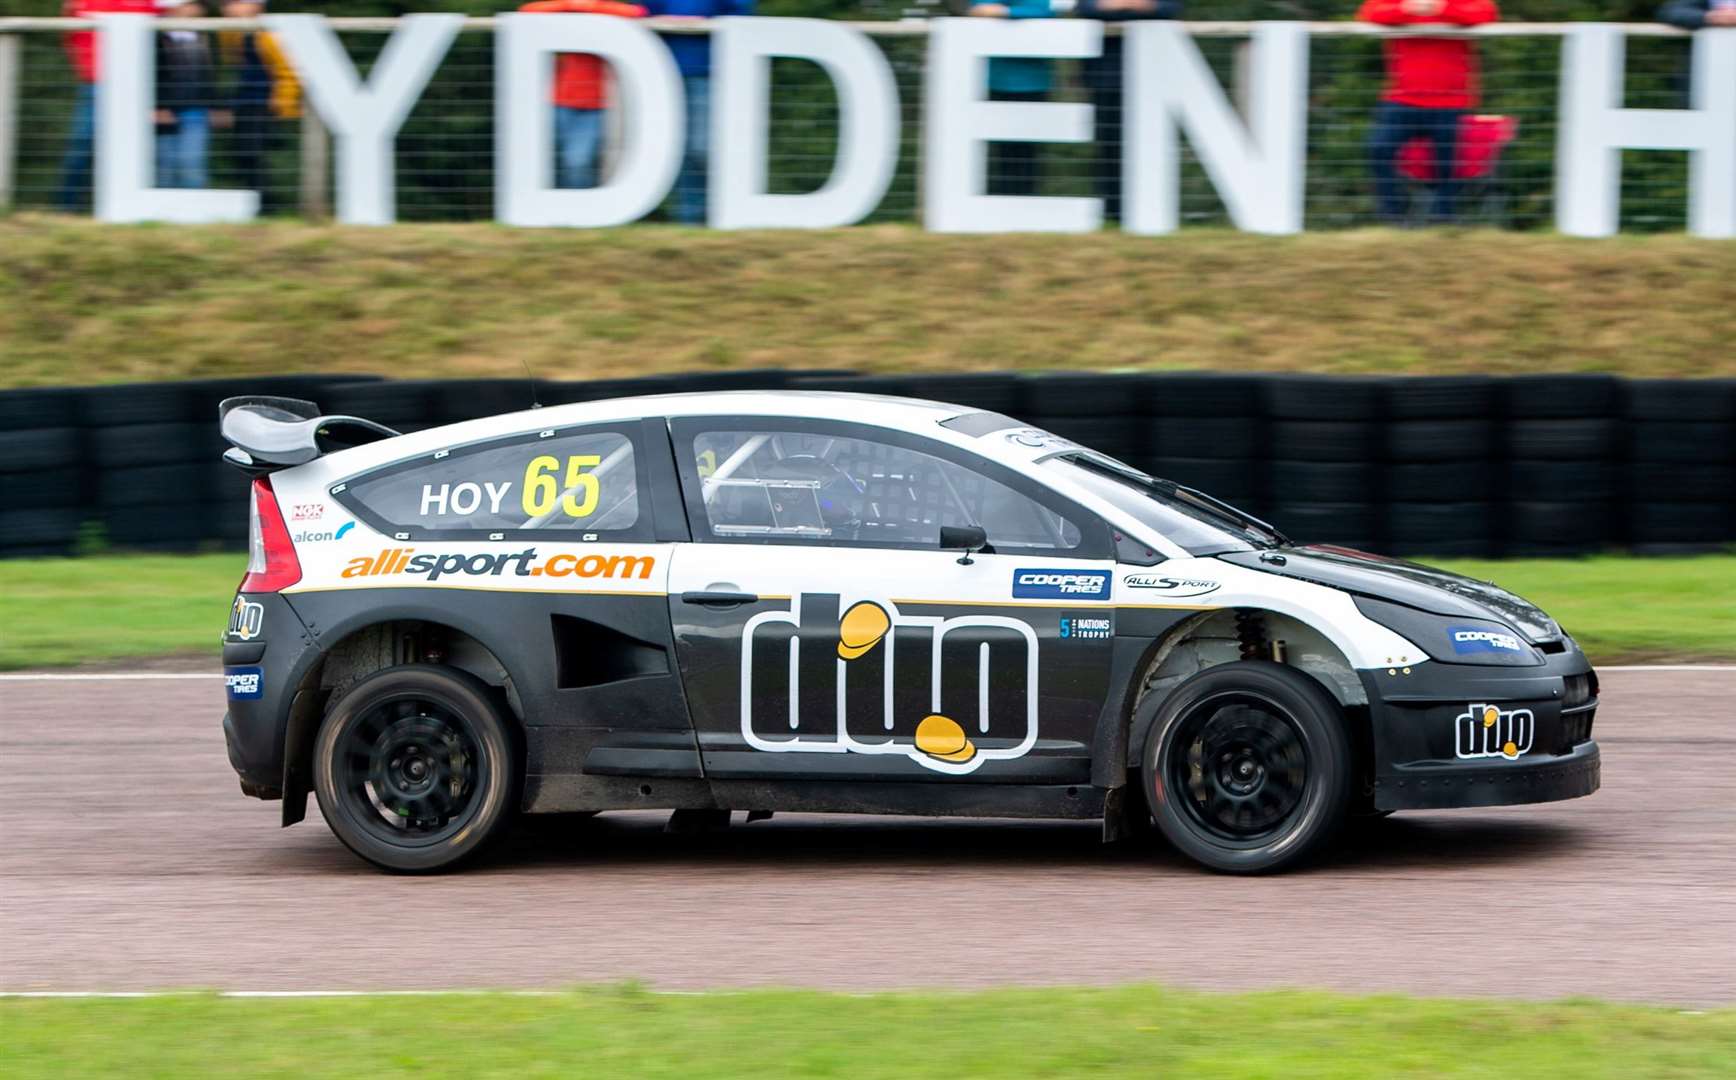 Olympic legend Sir Chris Hoy is returning to Lydden Hill this weekend. Picture: Motorsport UK British Rallycross Championship 5 Nations Trophy